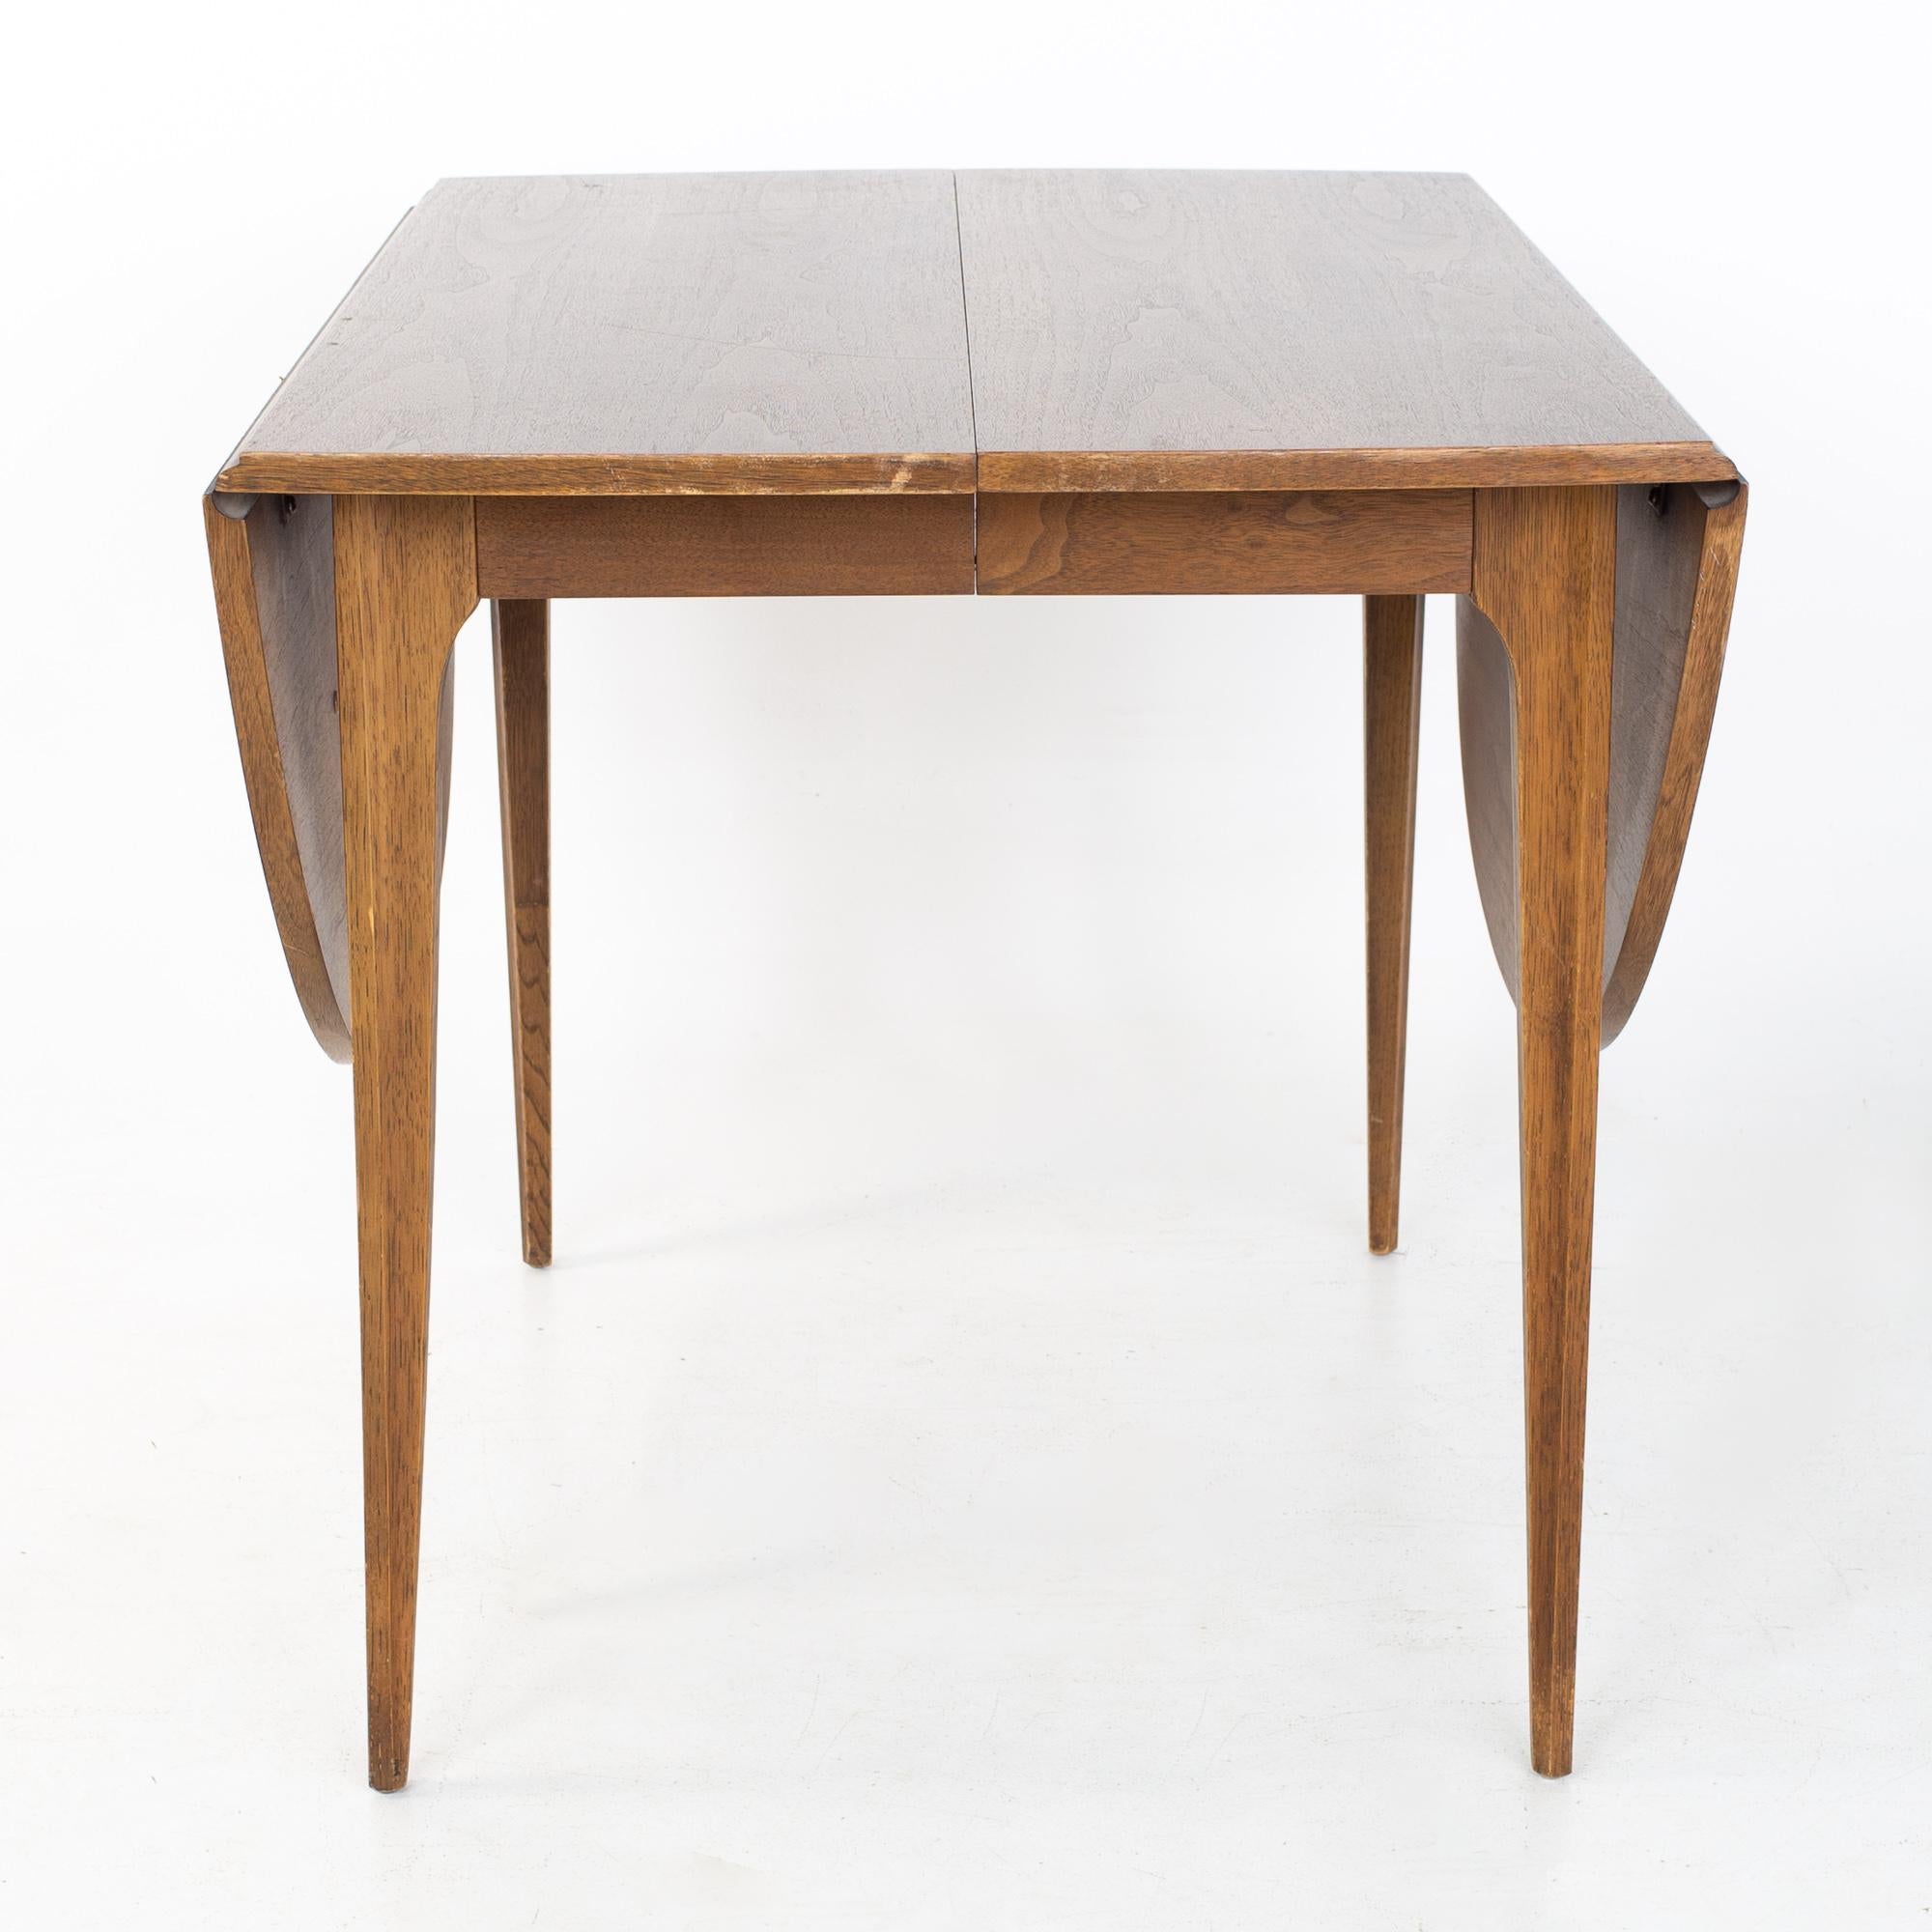 Broyhill Brasilia Mid Century Round Walnut Drop Leaf Expanding Dining Table In Good Condition For Sale In Countryside, IL